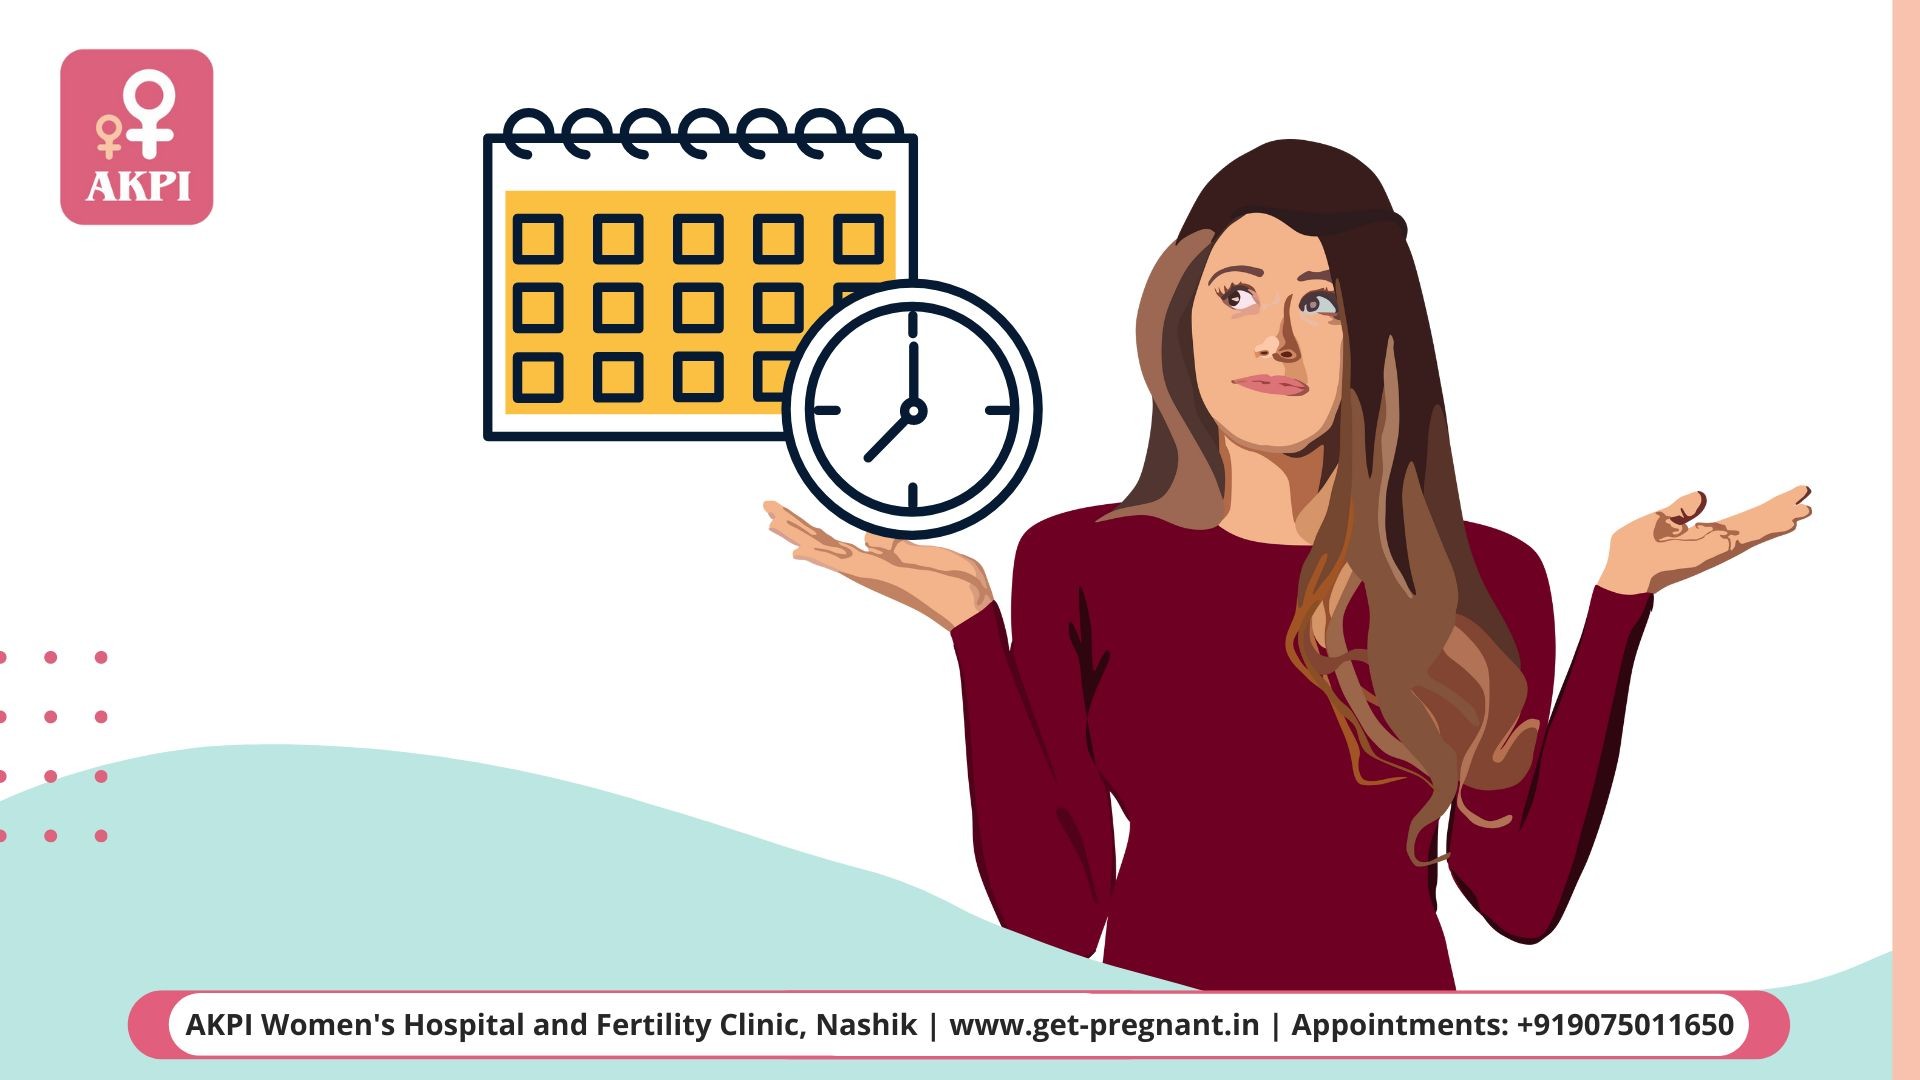 How long does IVF take to get pregnant? One cycle of IVF takes about eight weeks.